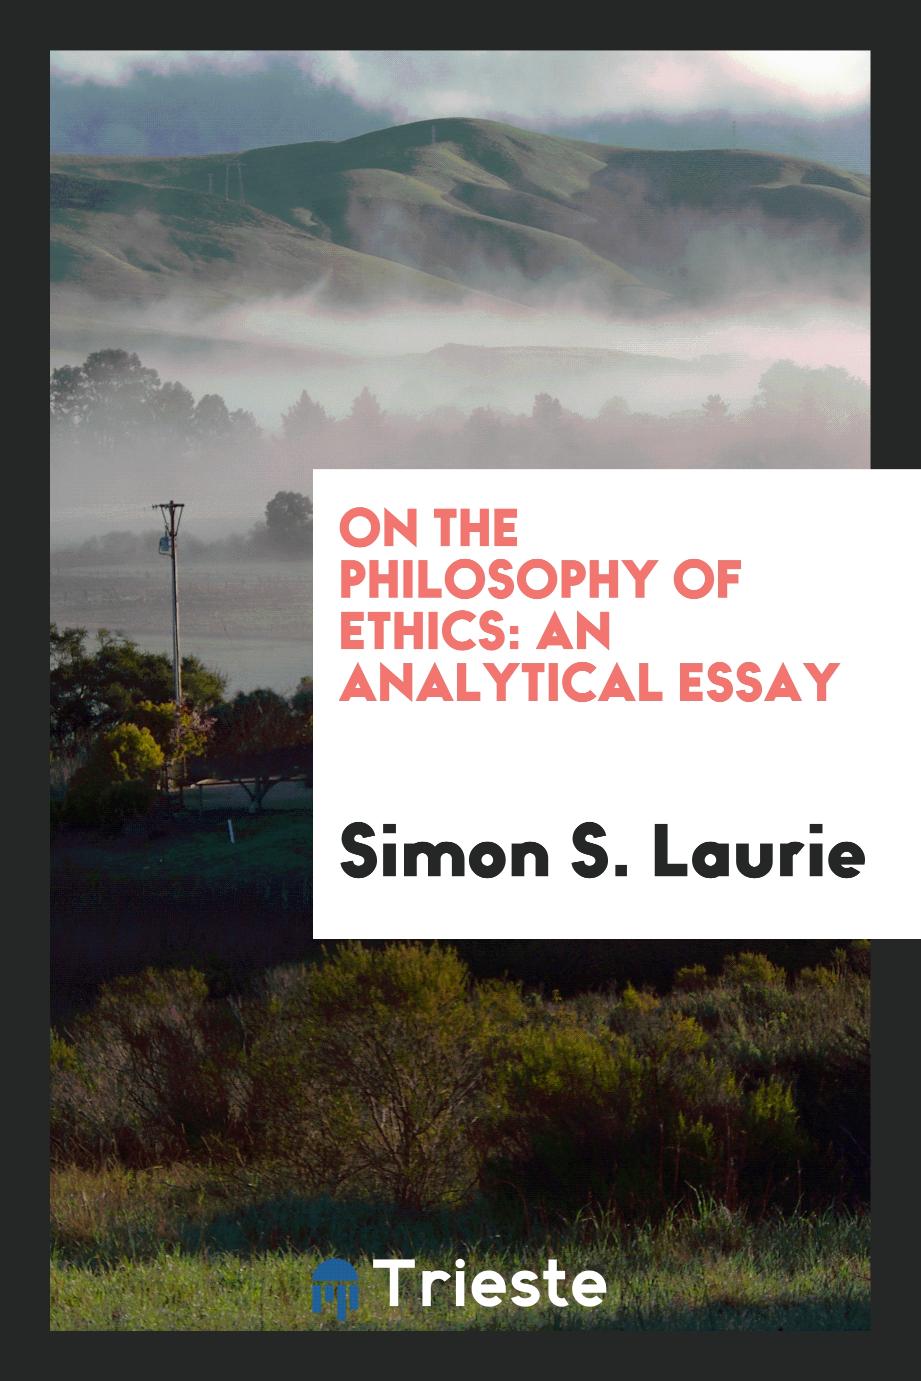 On the Philosophy of Ethics: An Analytical Essay